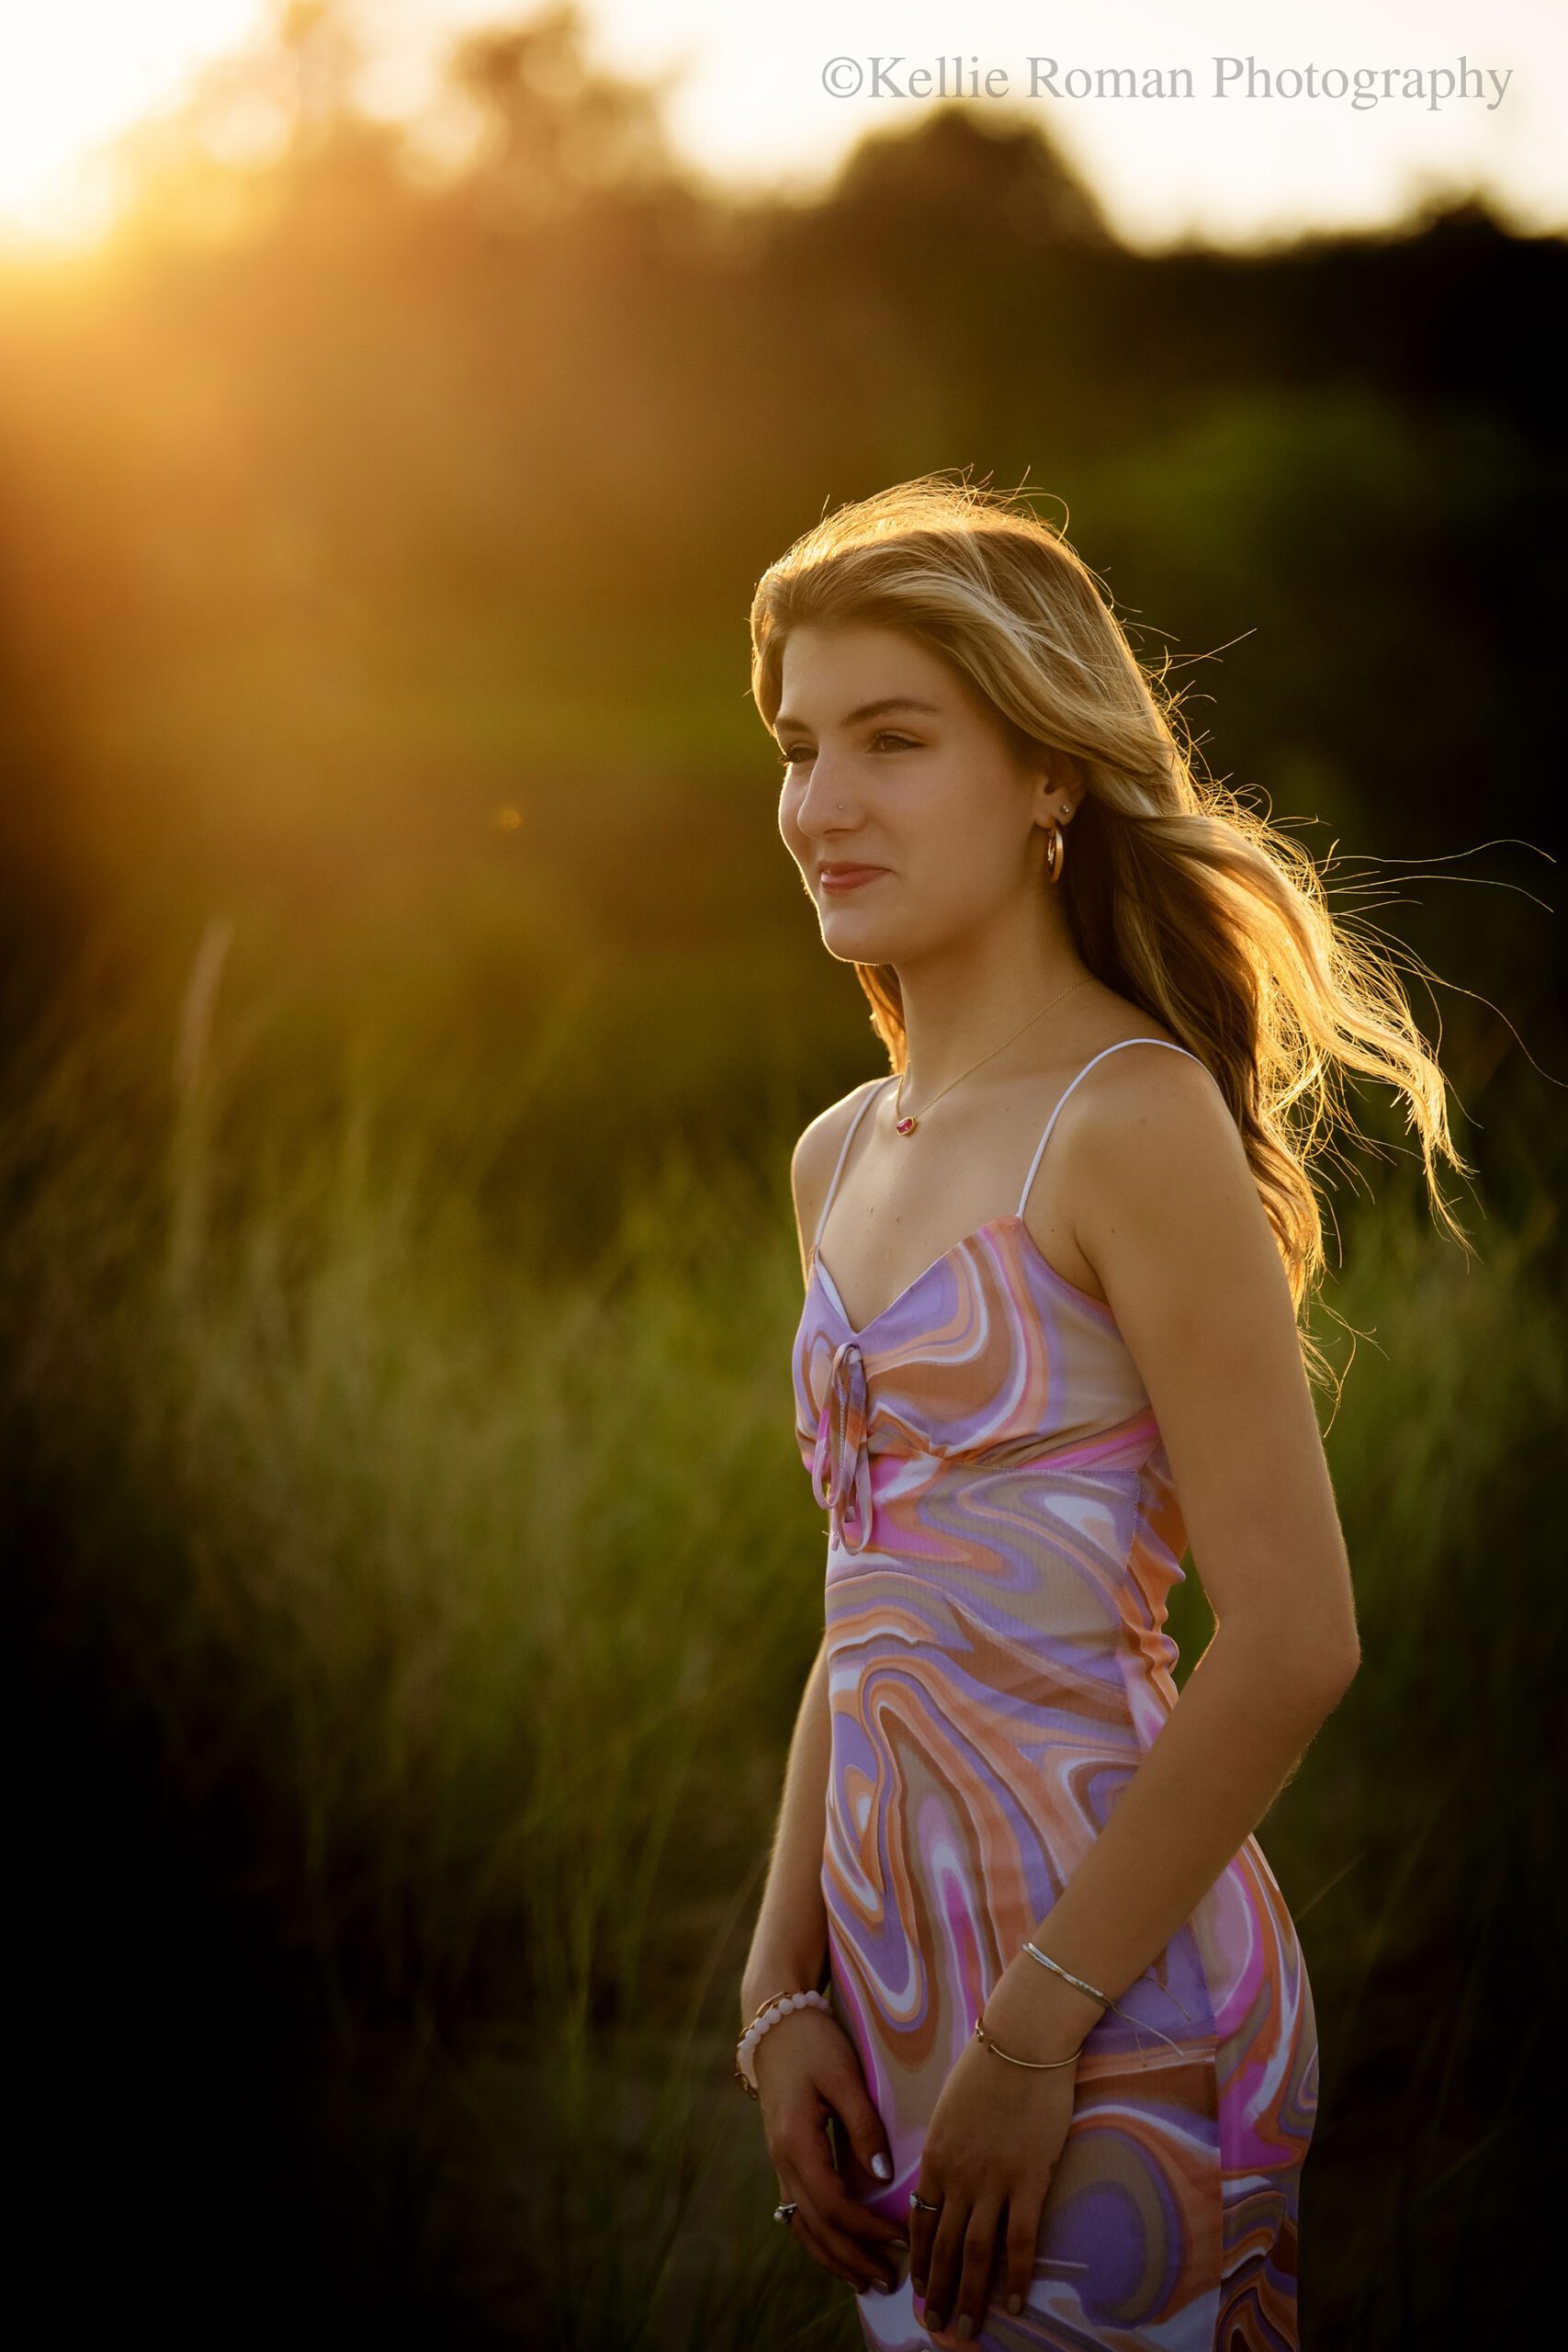 high school senior photographer.senior girl is on racine beach. she has on a pink and purple swirl tank top dress and is looking off in the distance with the golden sun setting behind her. her hair is light up in the sunlight.